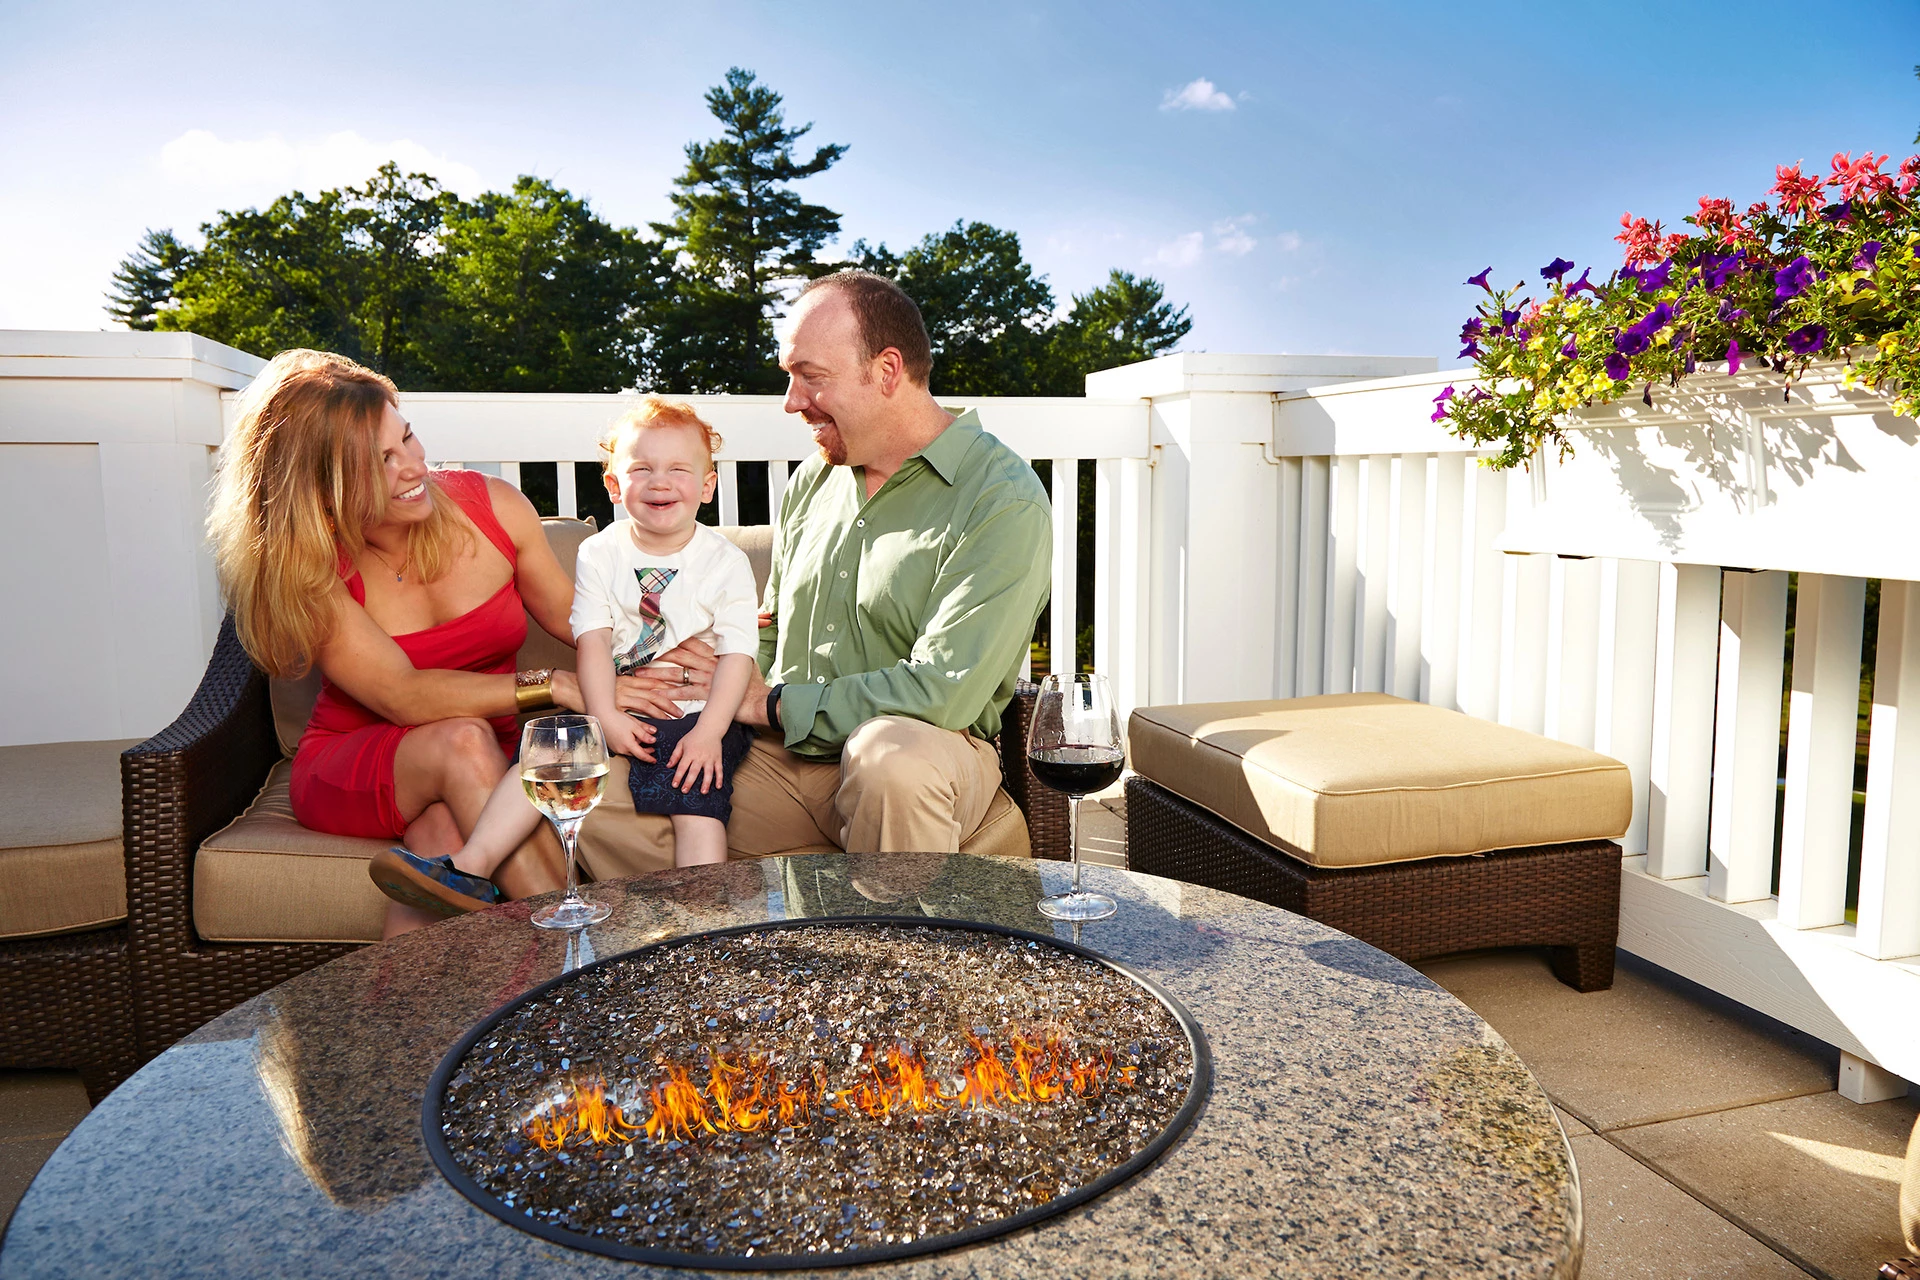 Ipswich Country Club - Family by the firepit